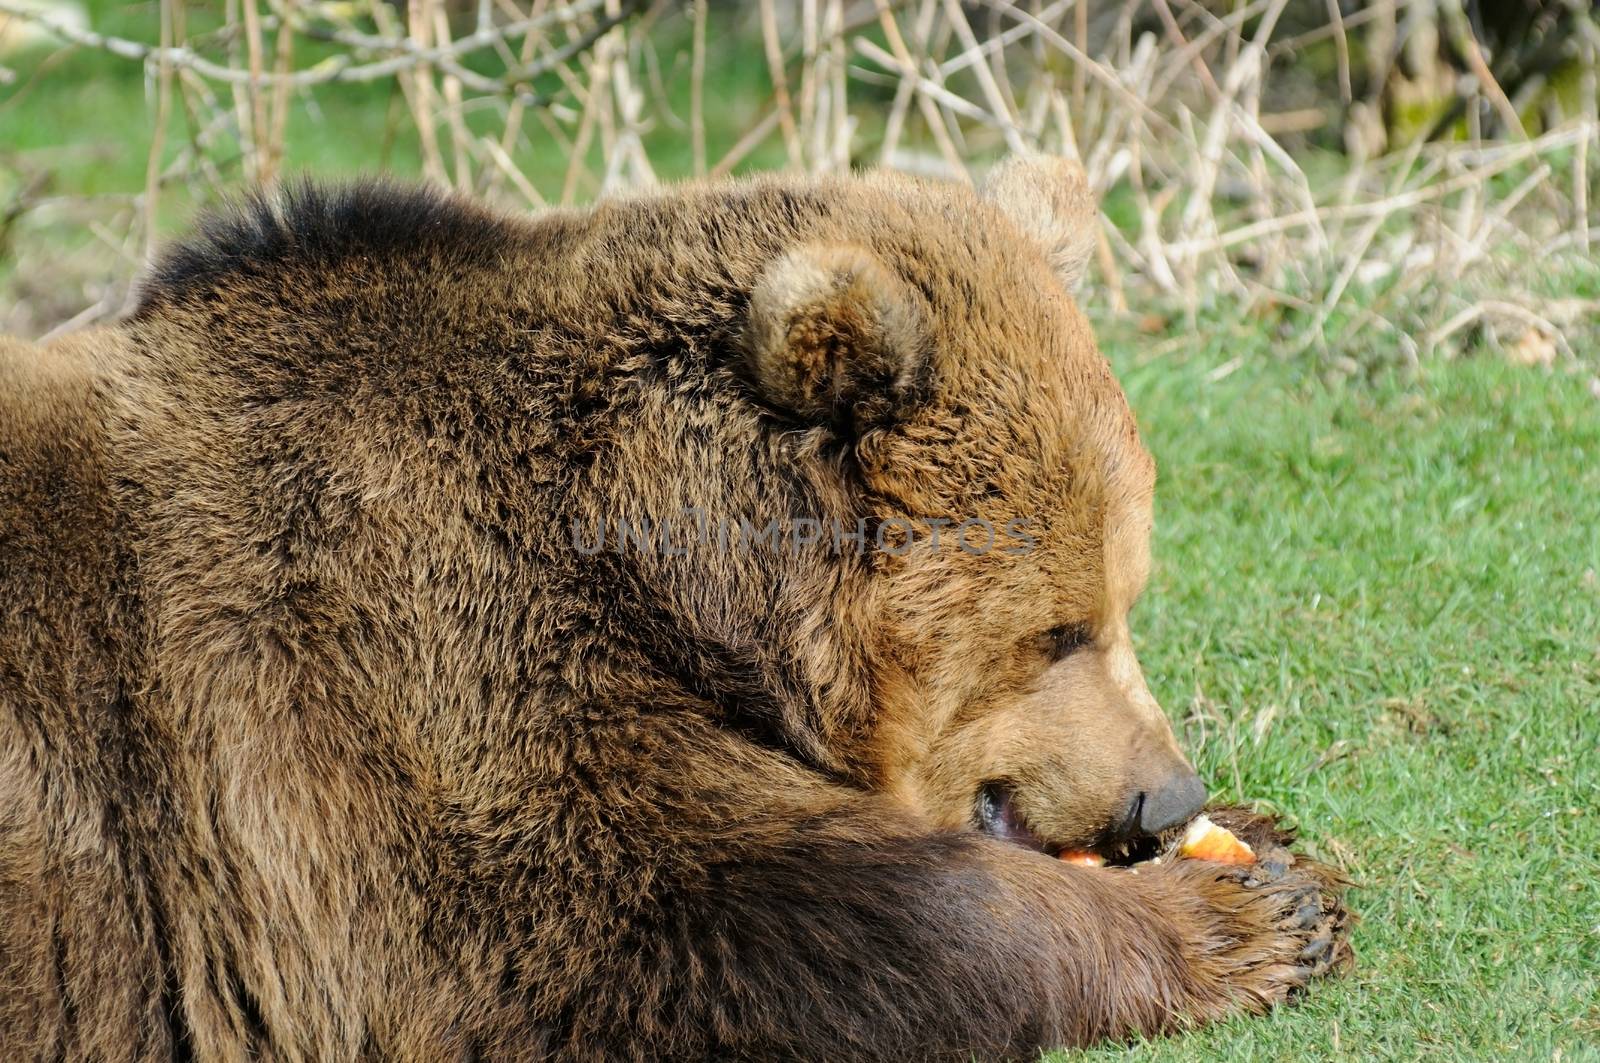 Brown bear eating by kmwphotography